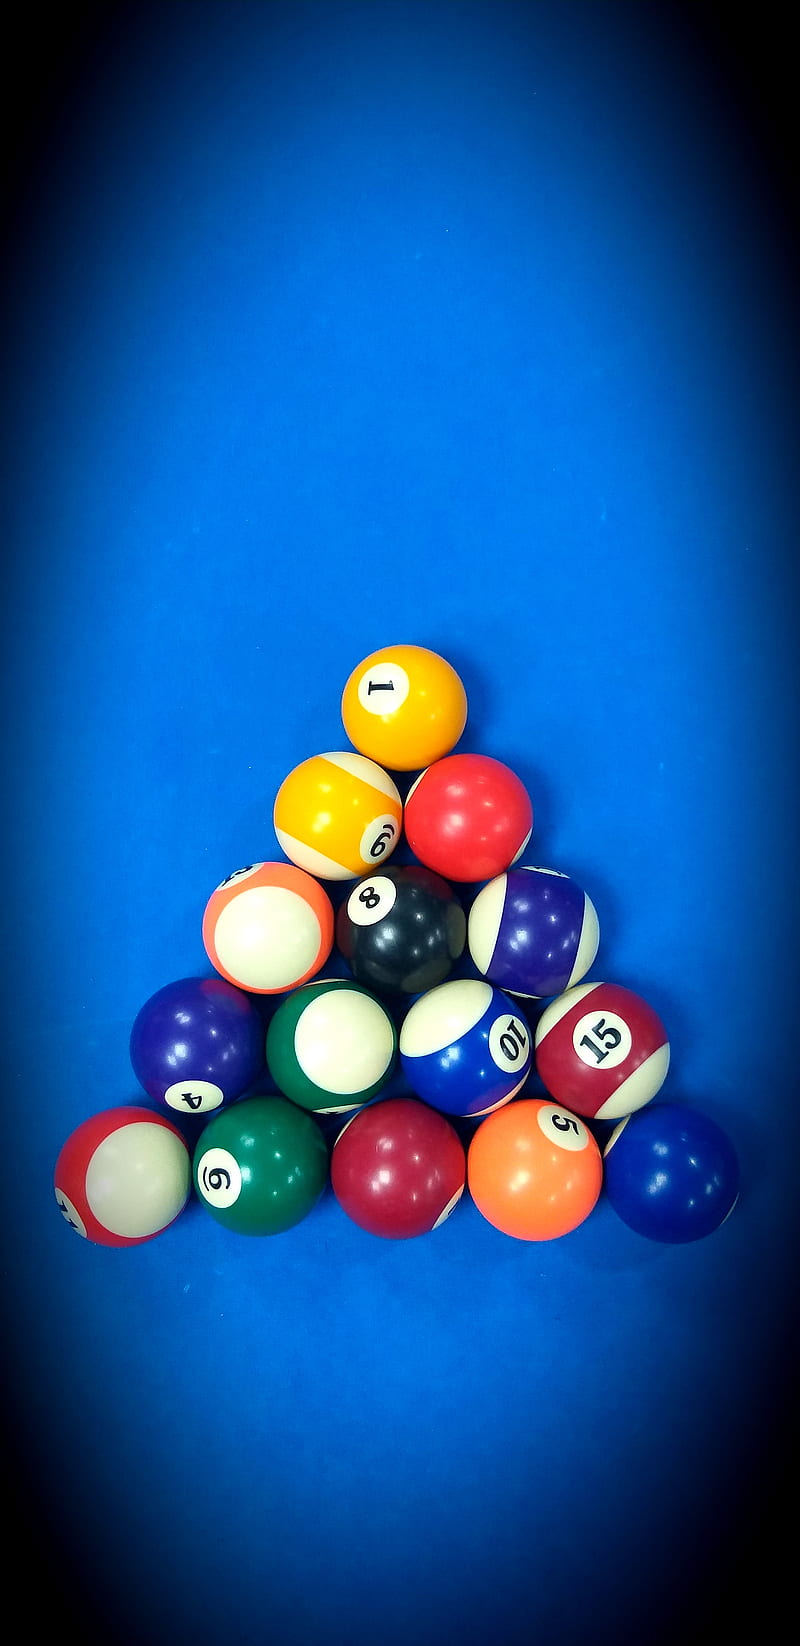 Real Pool 2023 - Apps on Google Play